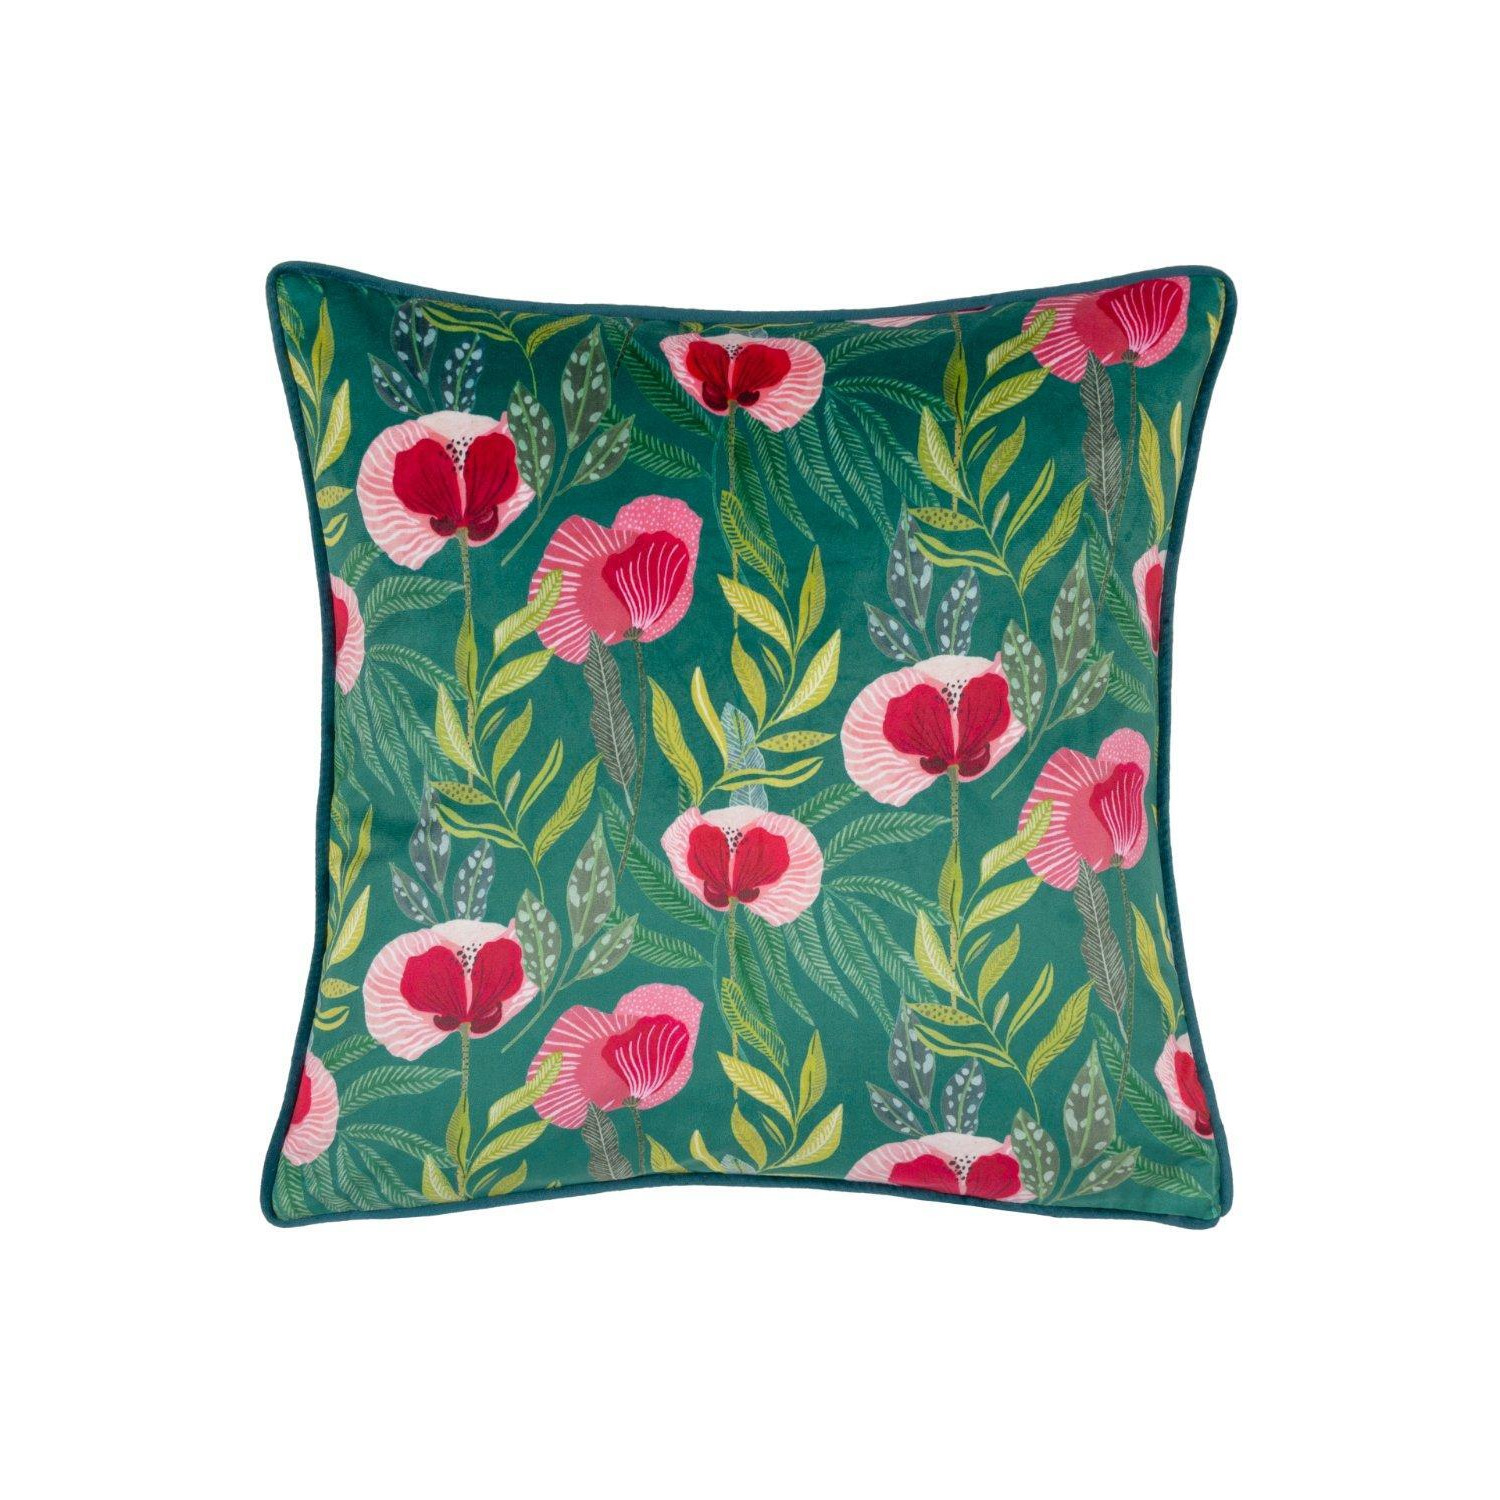 House of Bloom Poppy Piped Polyester Filled Cushion - image 1